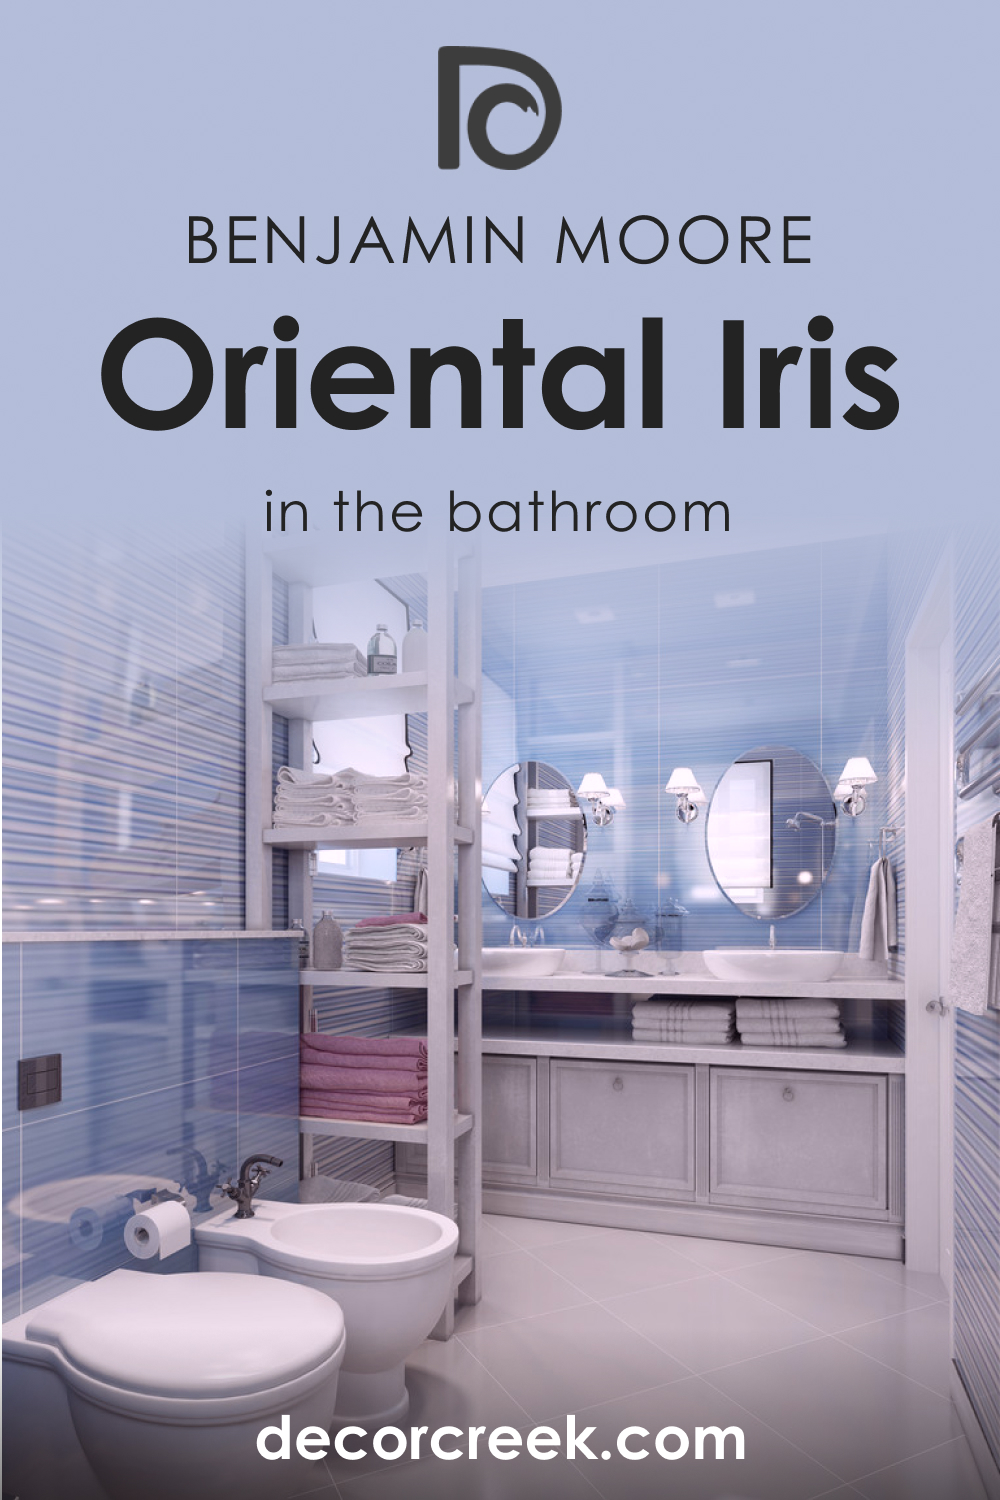 How to Use Oriental Iris 1418 in the Bathroom?